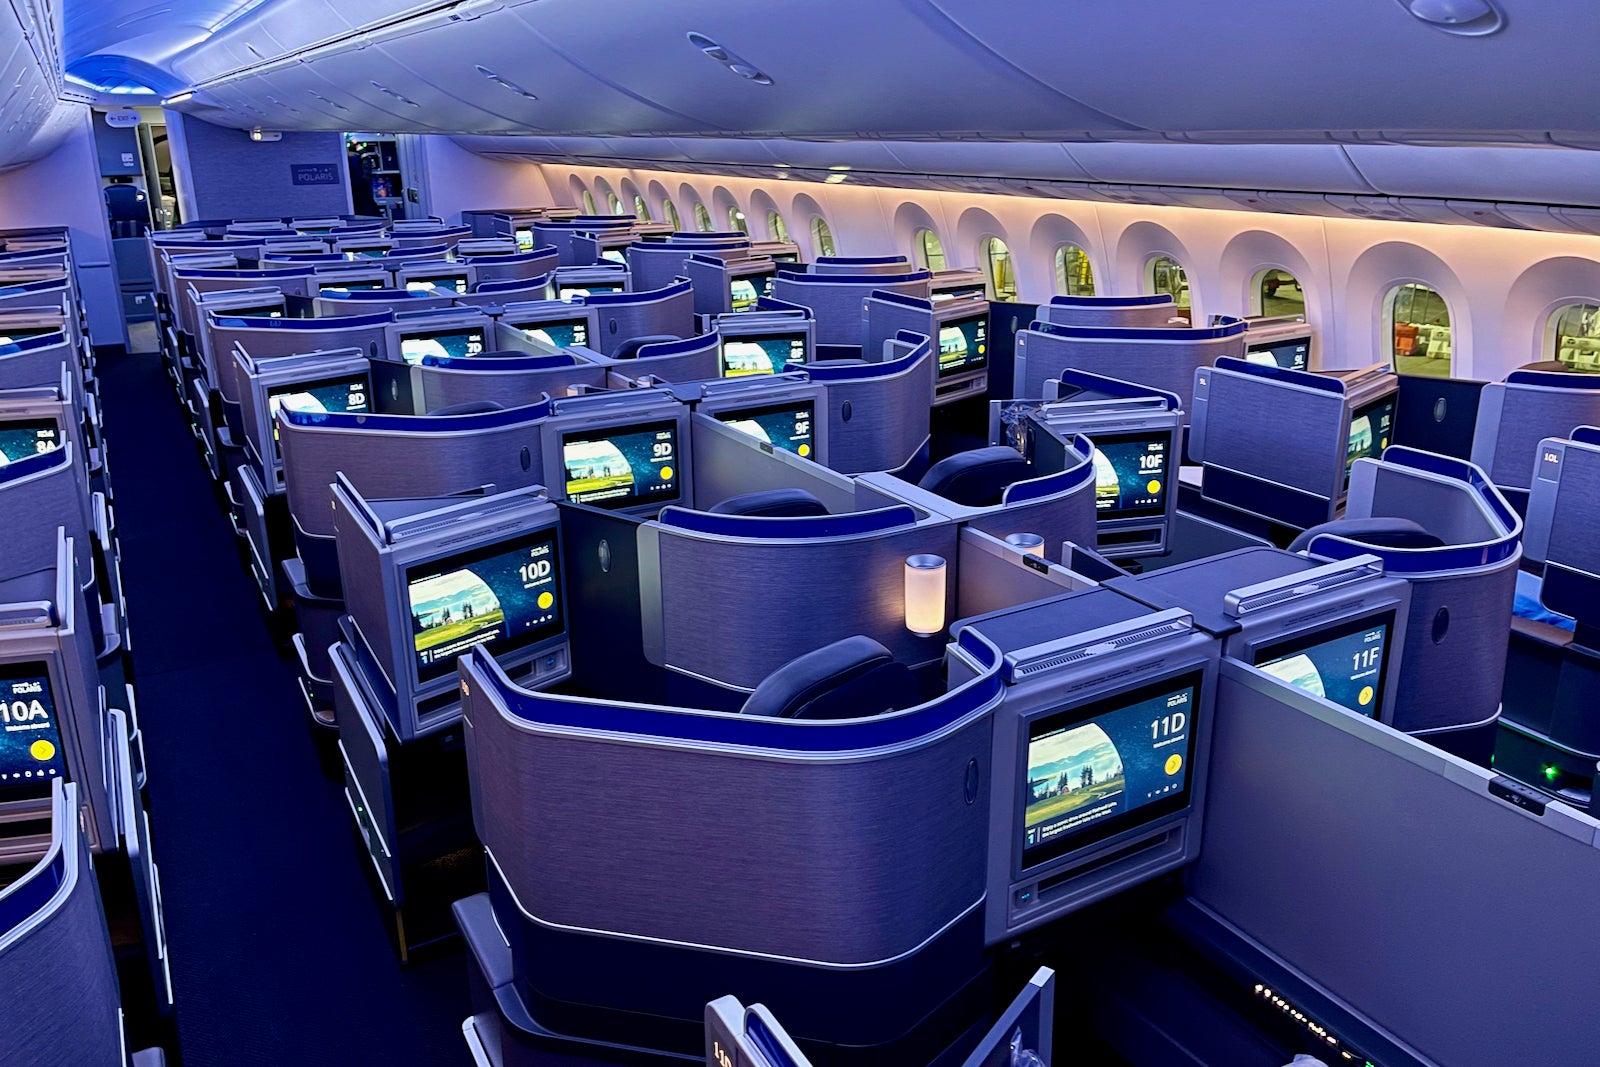 United extends travel waiver, offering a big advantage over AA and